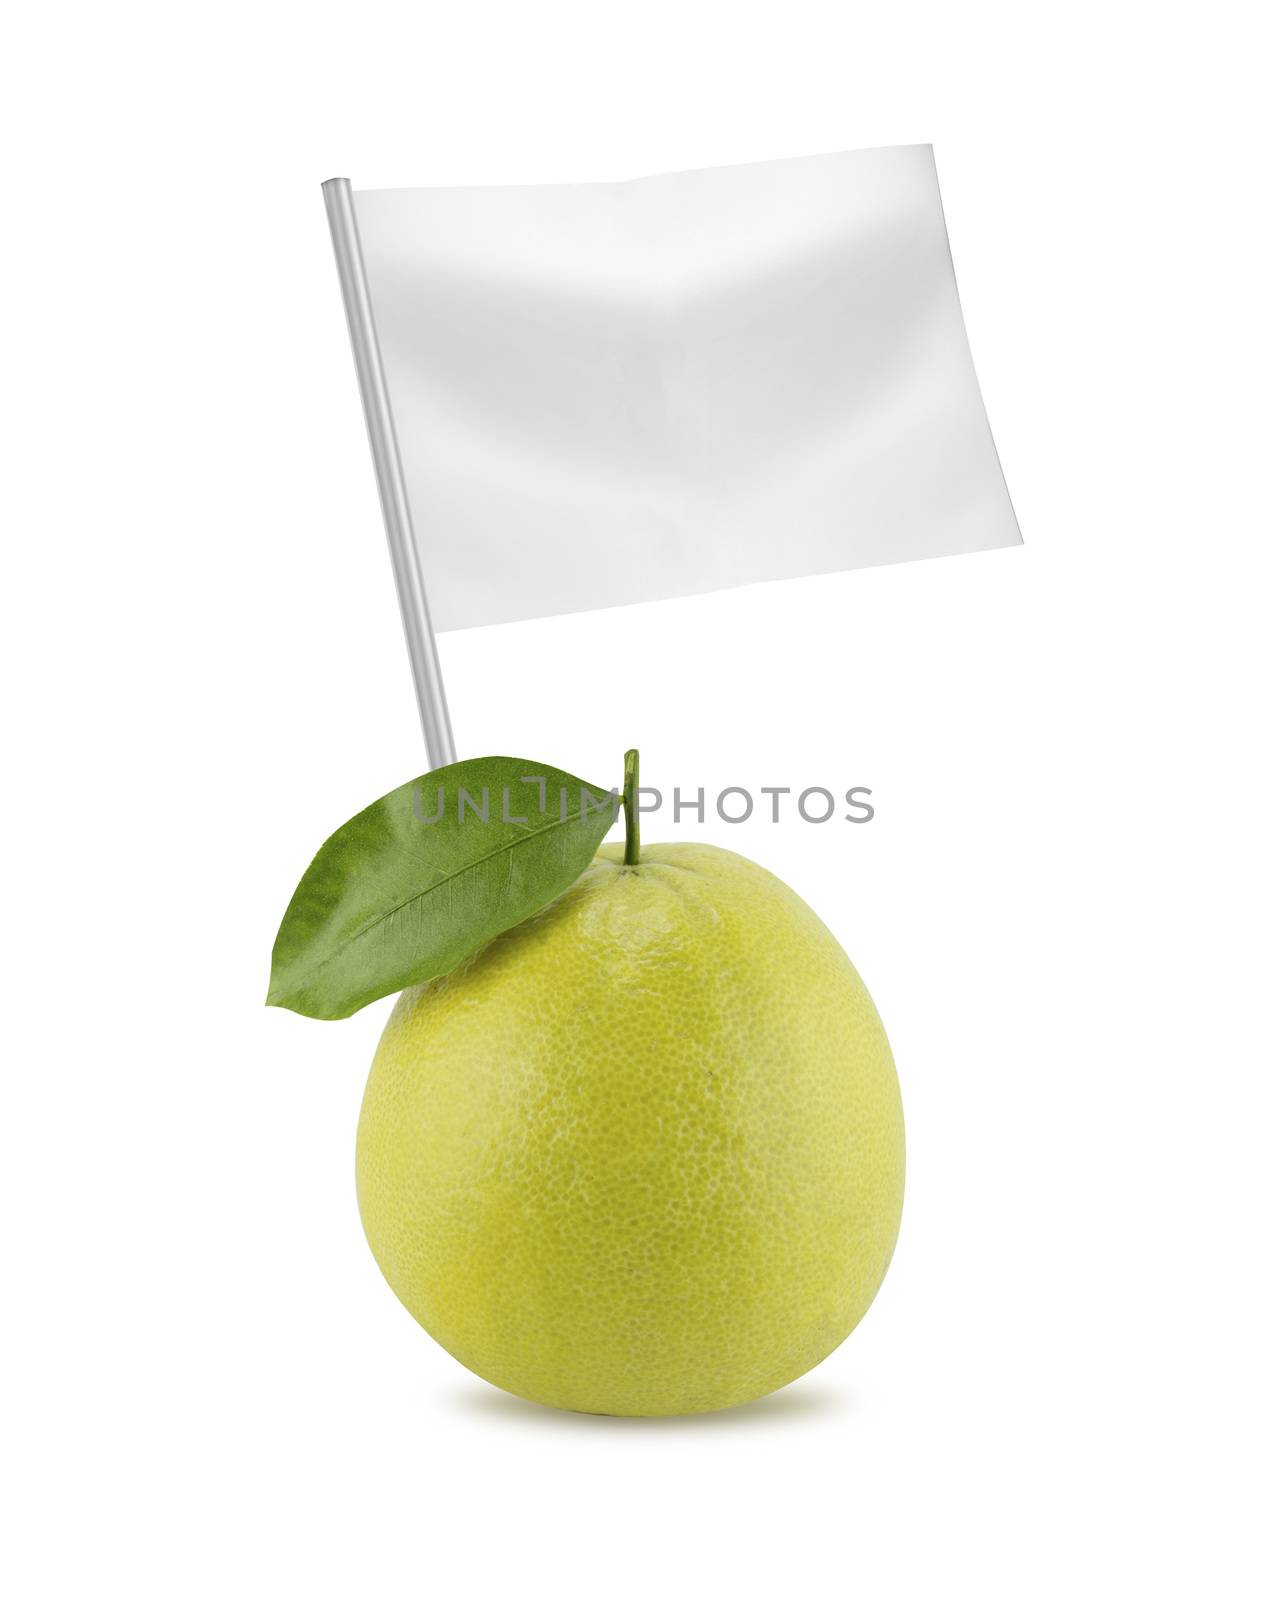 Healthy and organic food concept. Fresh Bergamot oranges with flag showing the benefits or the price of fruits.